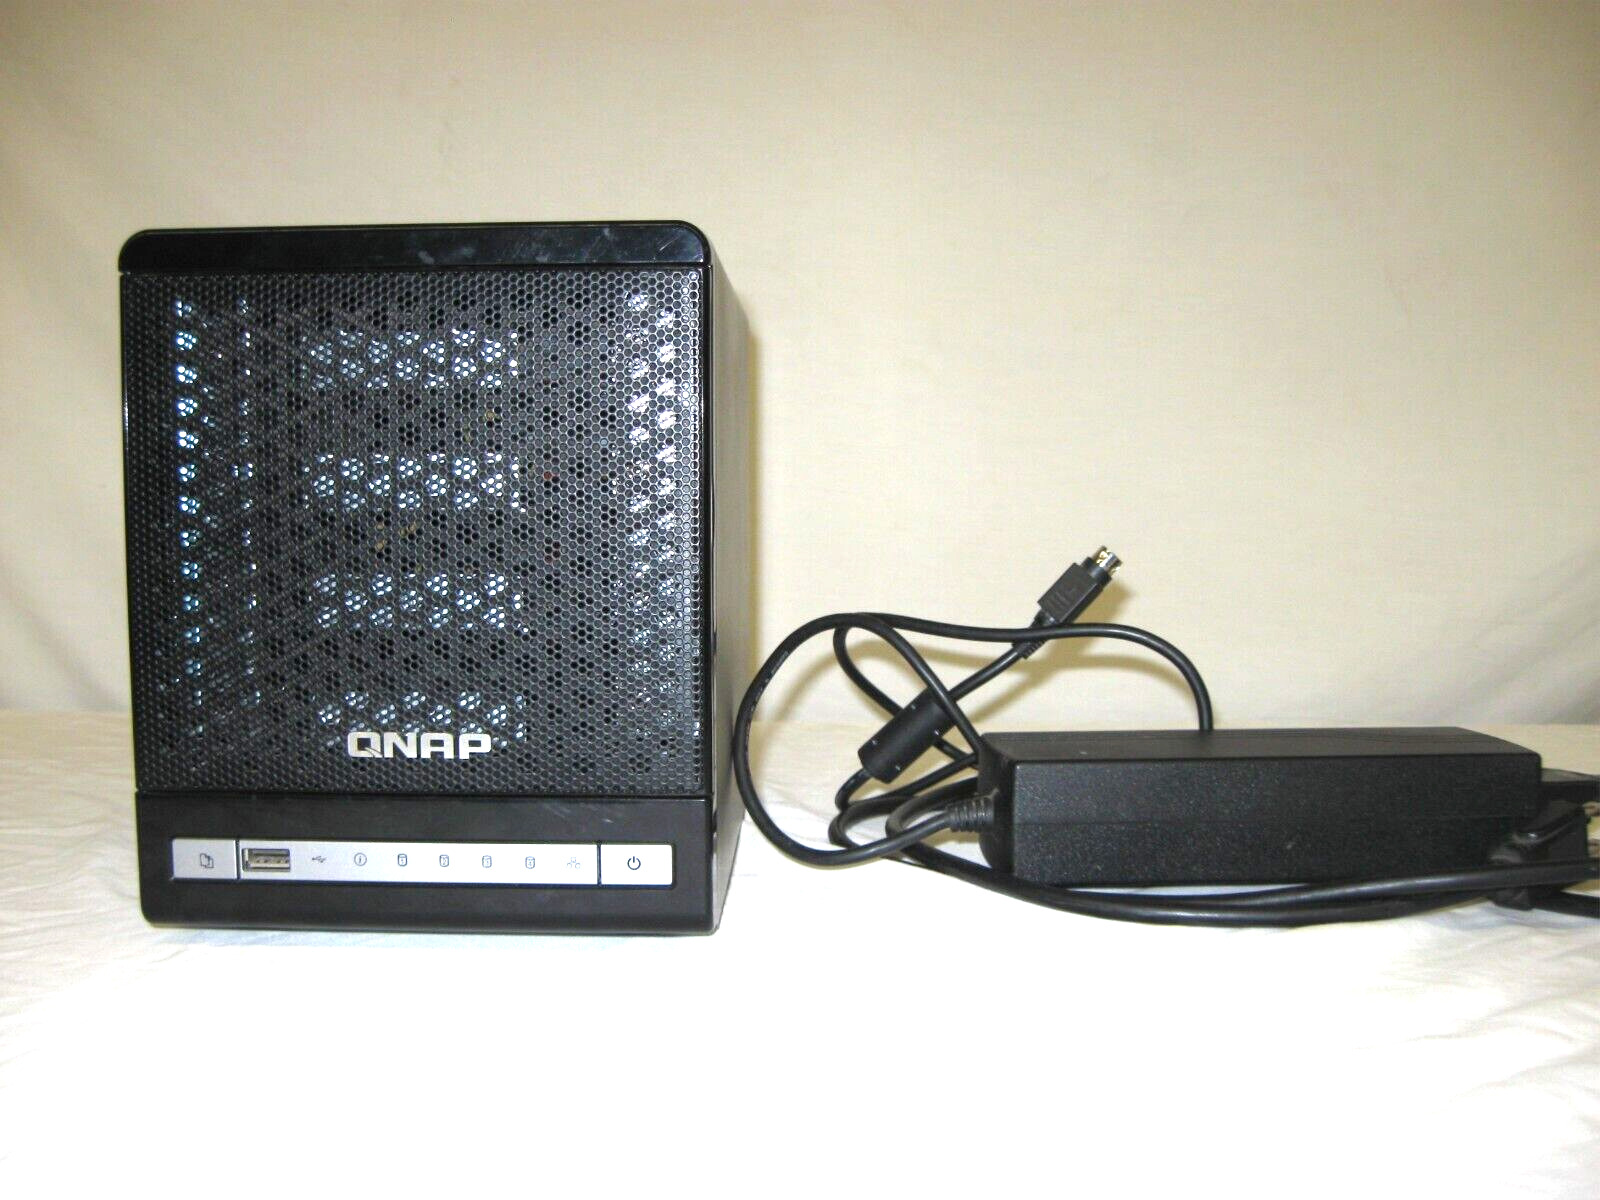 QNAP TS-409 Pro Network Attached Storage - Good condition